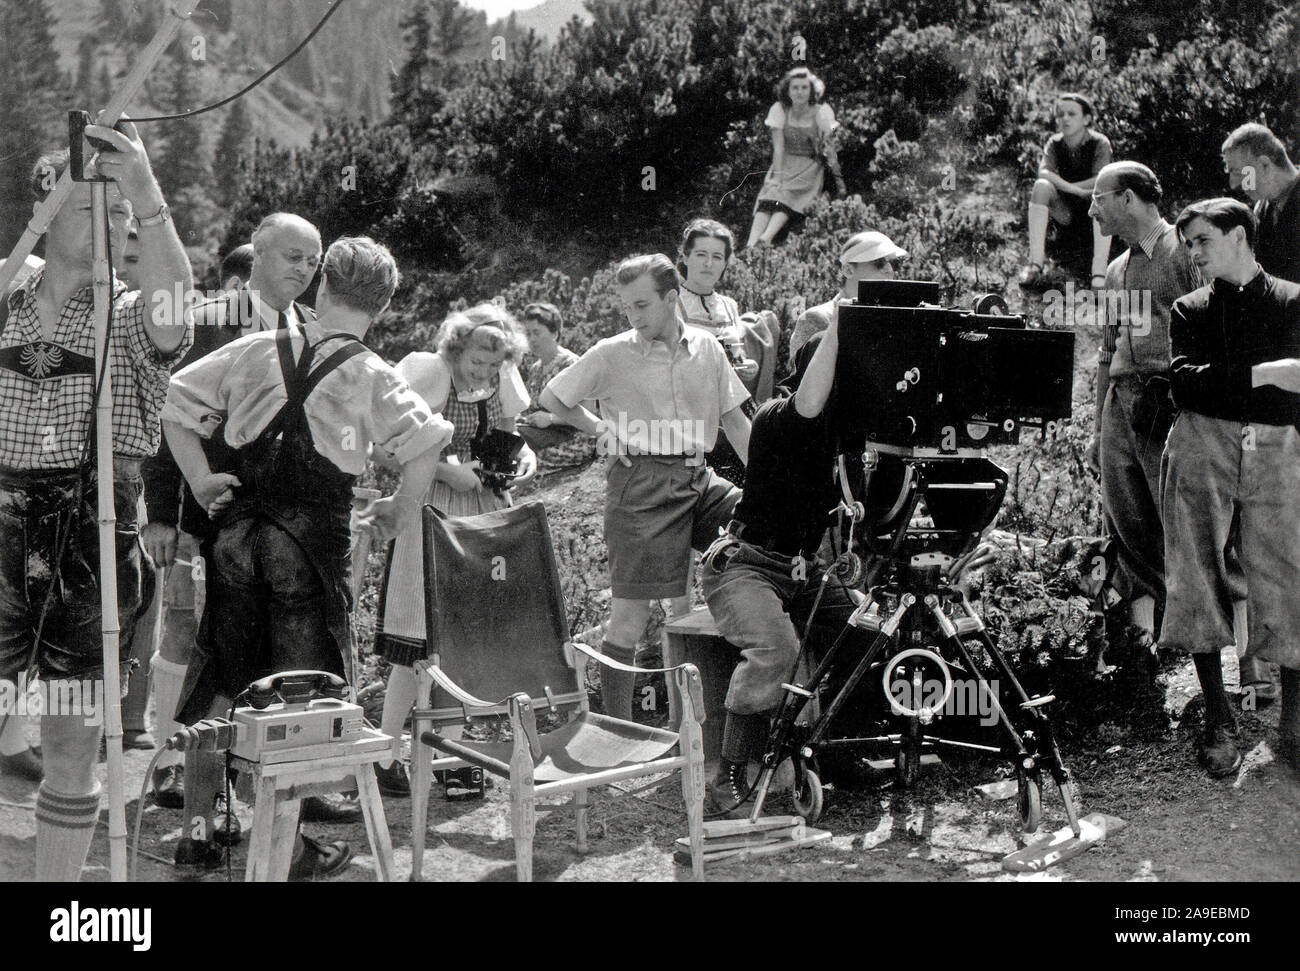 Eva Braun Collection (devet) - Original Caption: Besuch beim Film! Es wird gedreht 'der laufende Berg' (actors and actresses on movie set in Germany ca. late 1930s or early 1940s) Stock Photo